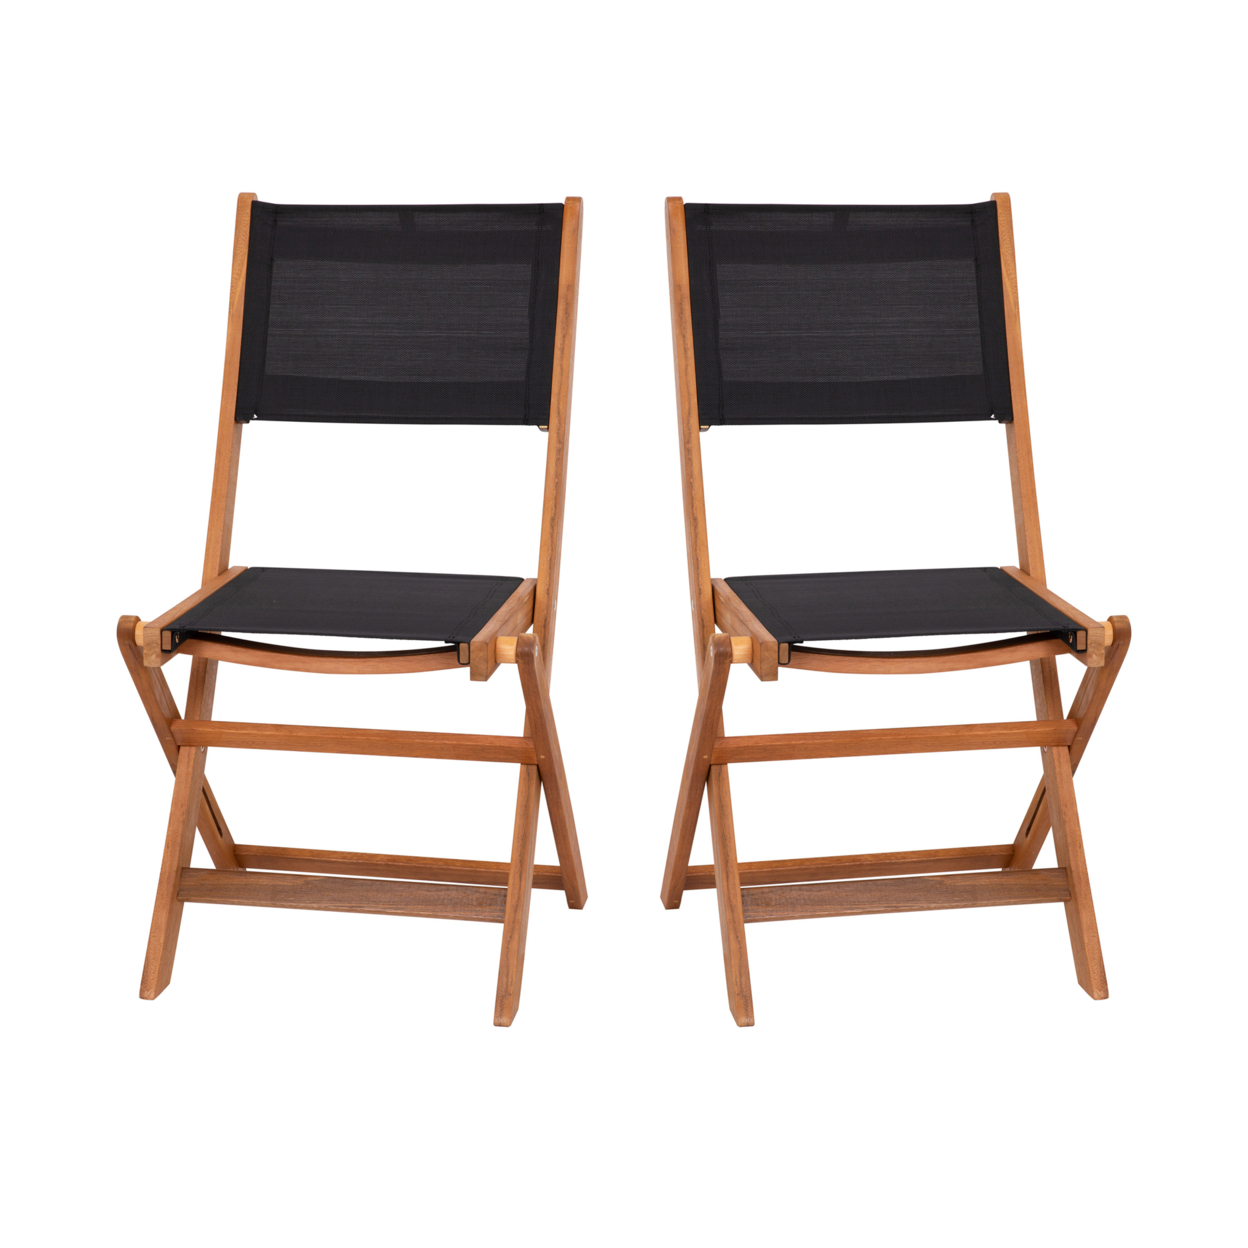 Indoor Outdoor Folding Bristo Chair, Textilene Seat And Back, Brown Wood